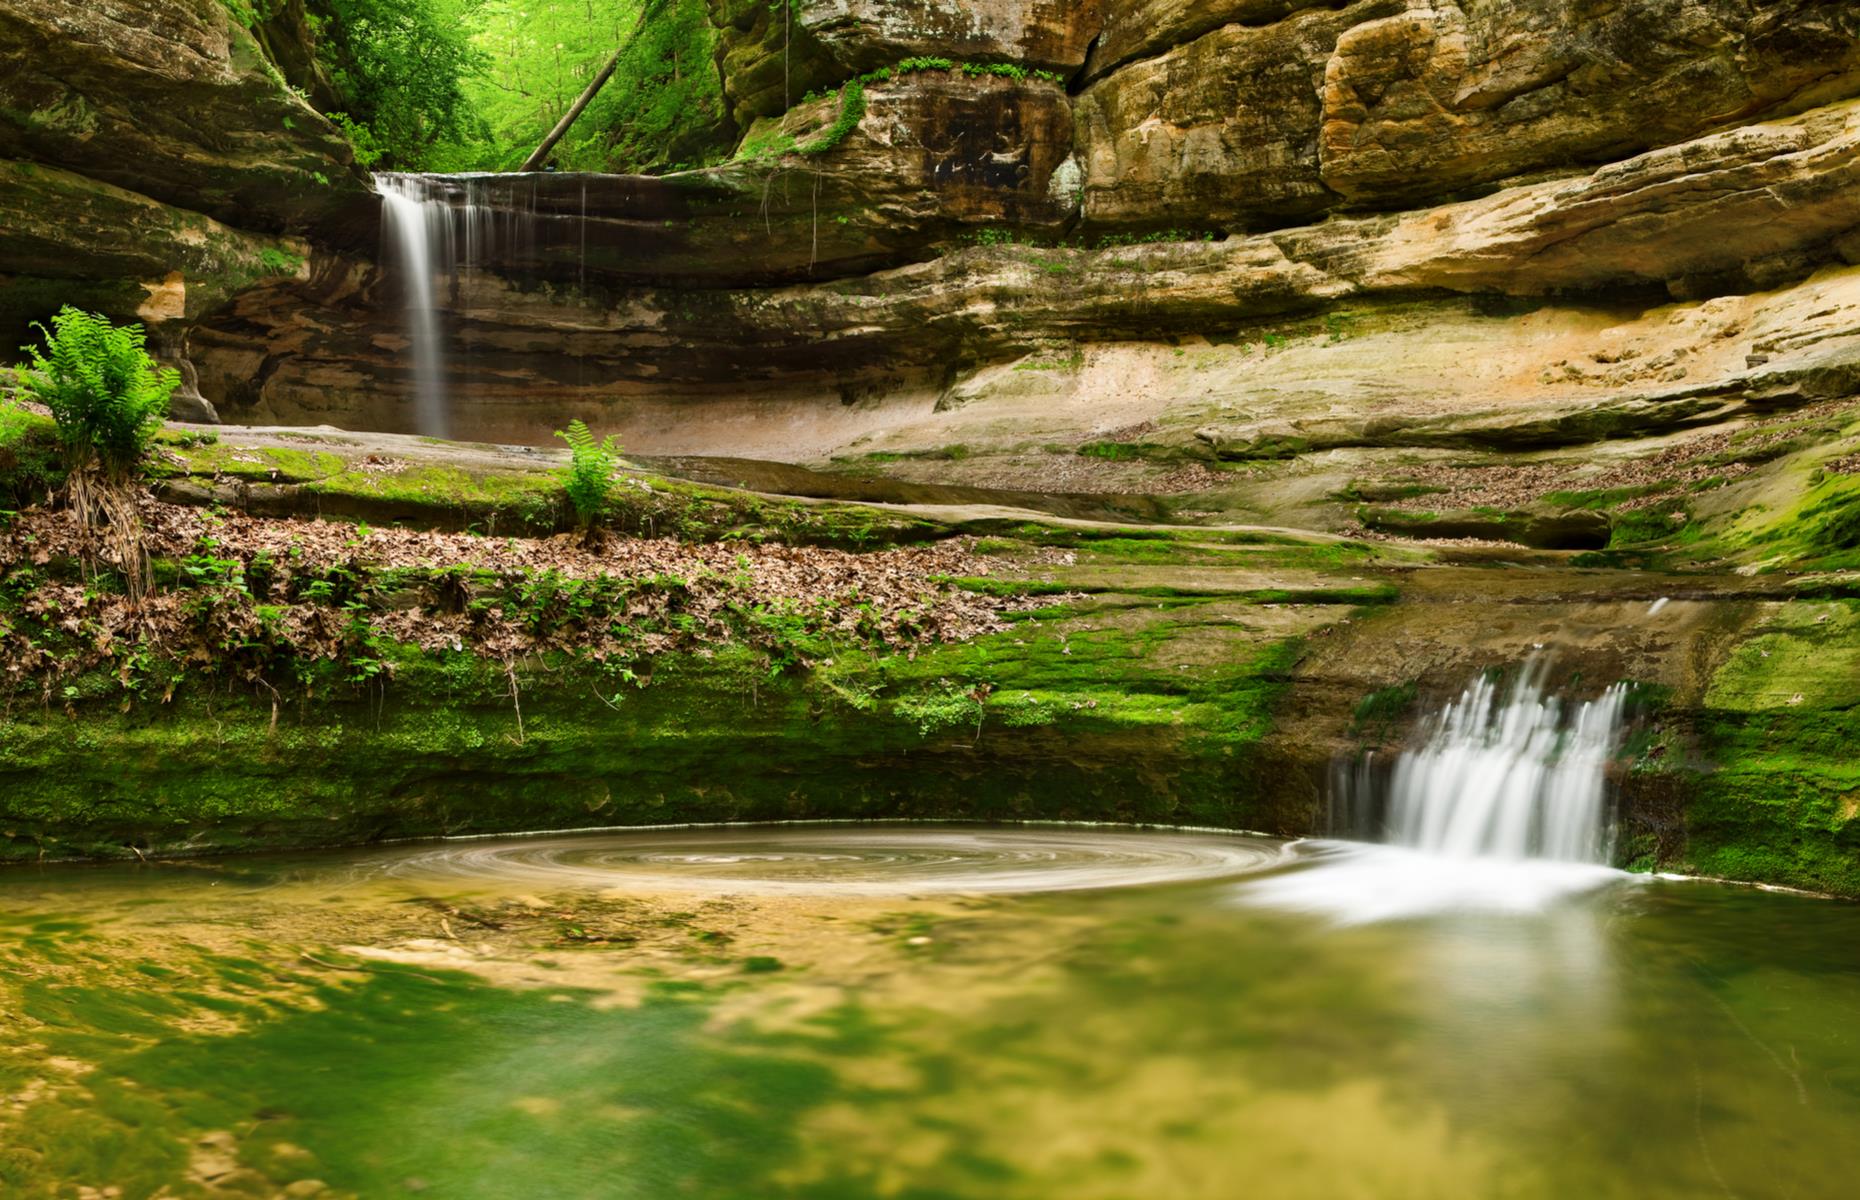 <p>It’s only a two-hour drive from Chicago to Starved Rock State Park but it instantly feels like a different world – sandstone canyons, bald eagles soaring over the Illinois River and waterfalls that freeze mid-flow in winter. There’s just <a href="https://www.starvedrocklodge.com/starved-rock-state-park/">one campground</a> and it fills fast on summer weekends but during the week it’s much easier to get a spot and, usually, it's blissfully quiet. These are <a href="https://www.loveexploring.com/galleries/95339/these-are-americas-most-unspoiled-places">America's most unspoiled places</a>.</p>